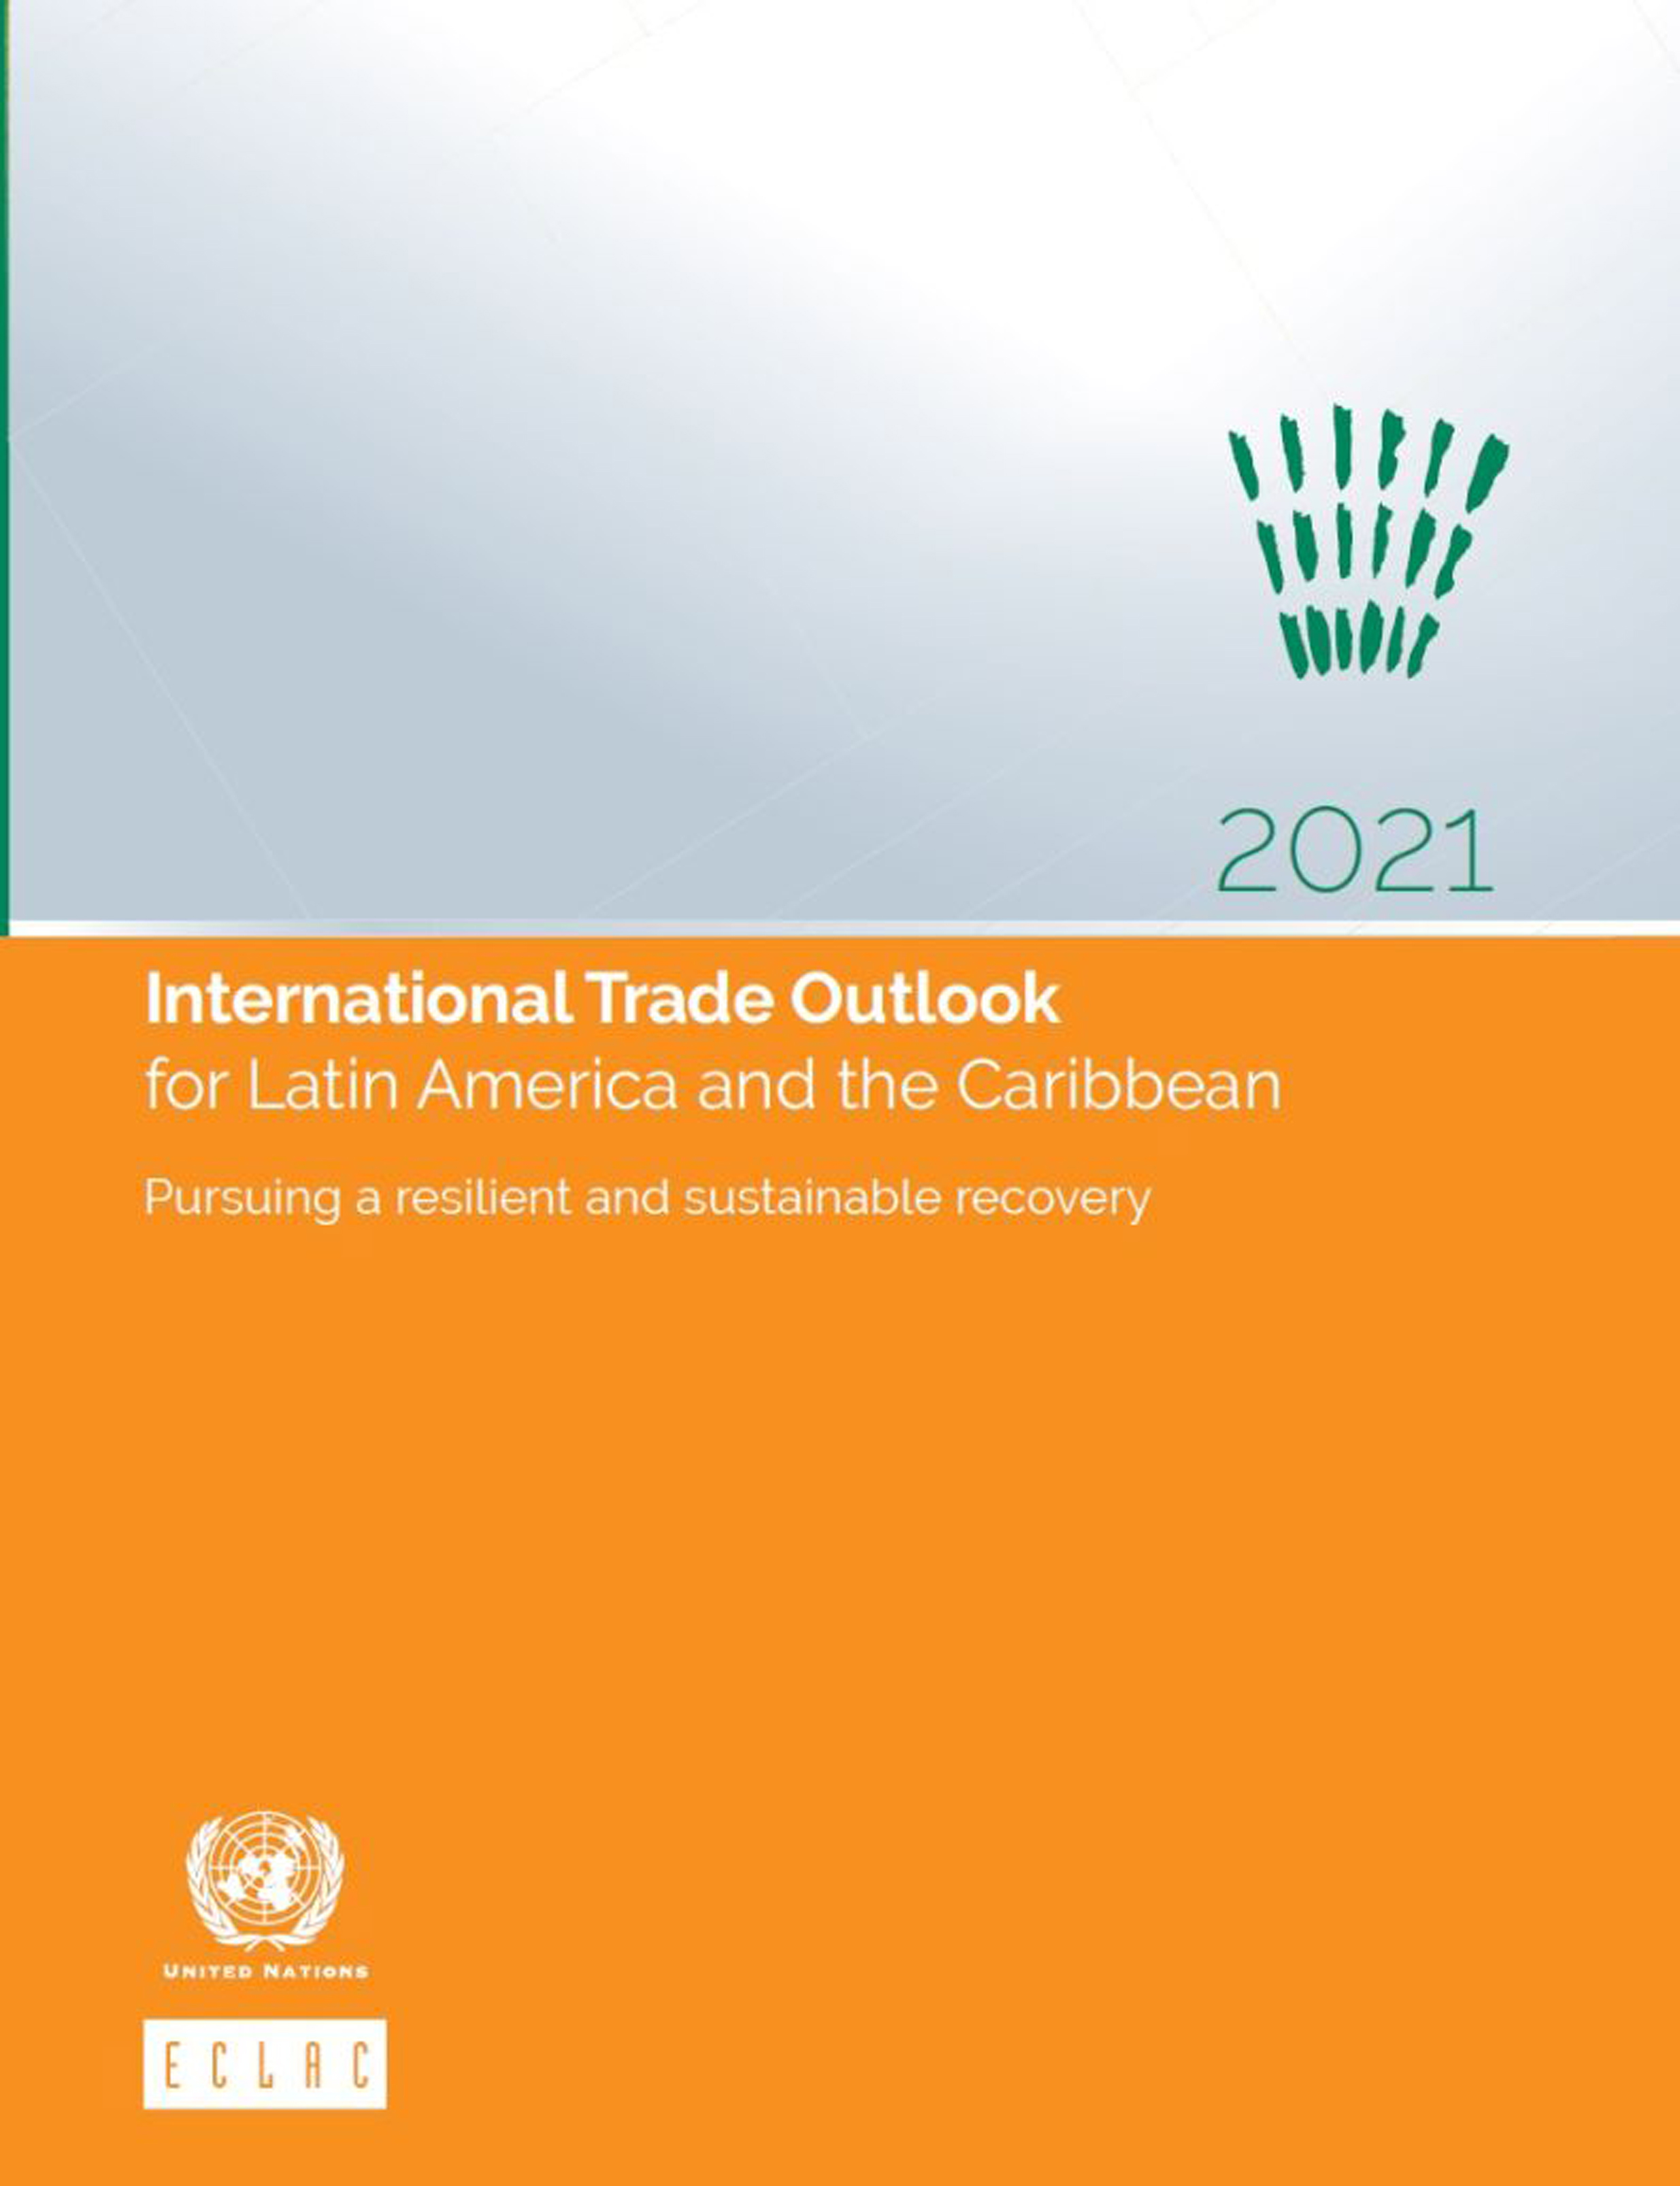 image of International Trade Outlook for Latin America and the Caribbean 2021